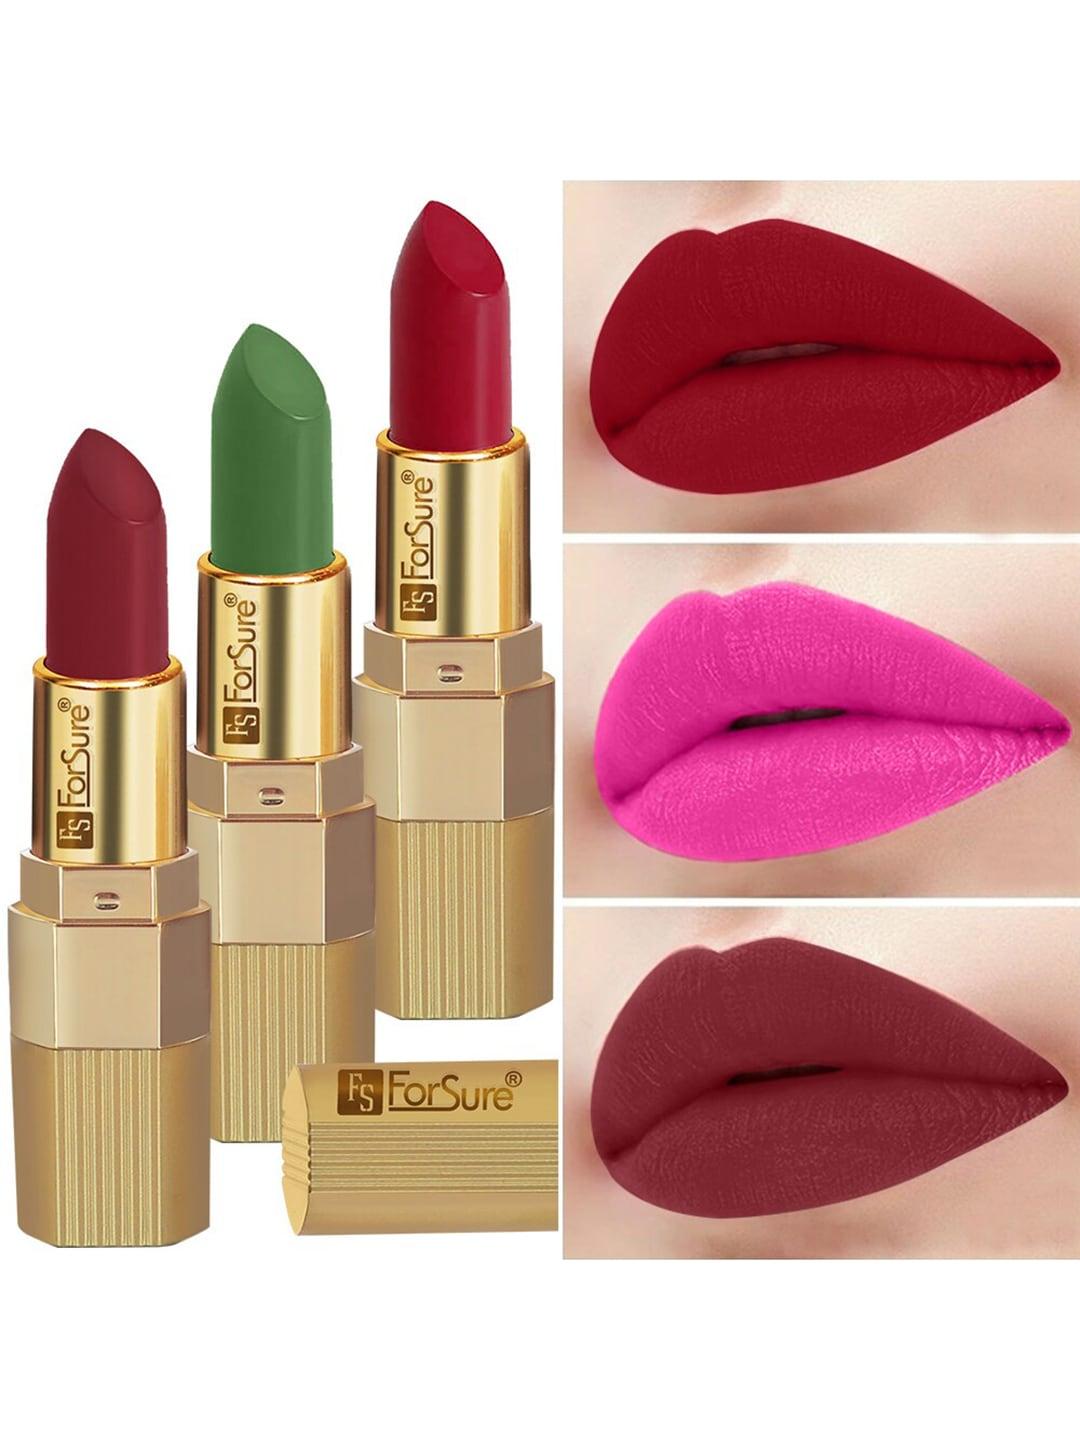 ForSure Set Of 3 Xpression Long Lasting Highly Pigmented Creamy Matte Lipstick - 3.5g Each